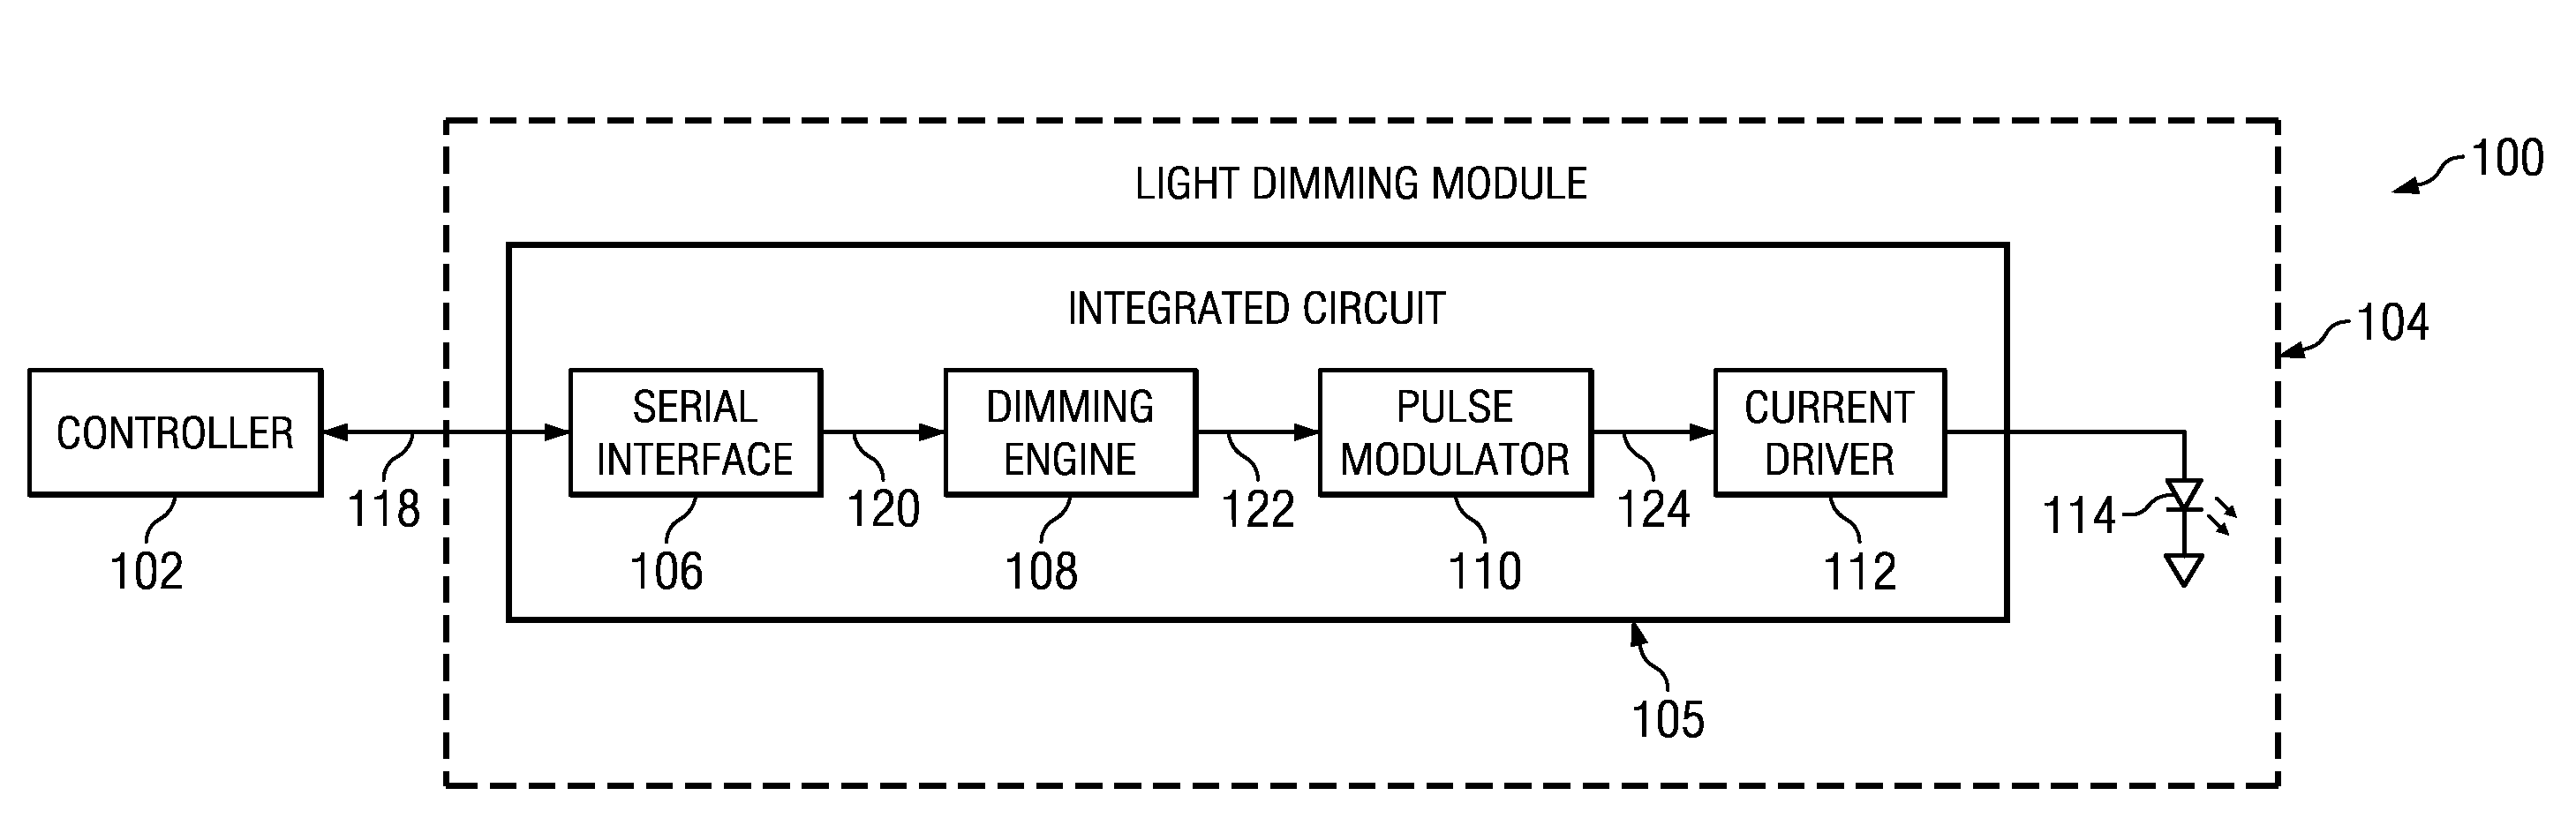 System and Method for Non-Linear Dimming of a Light Source